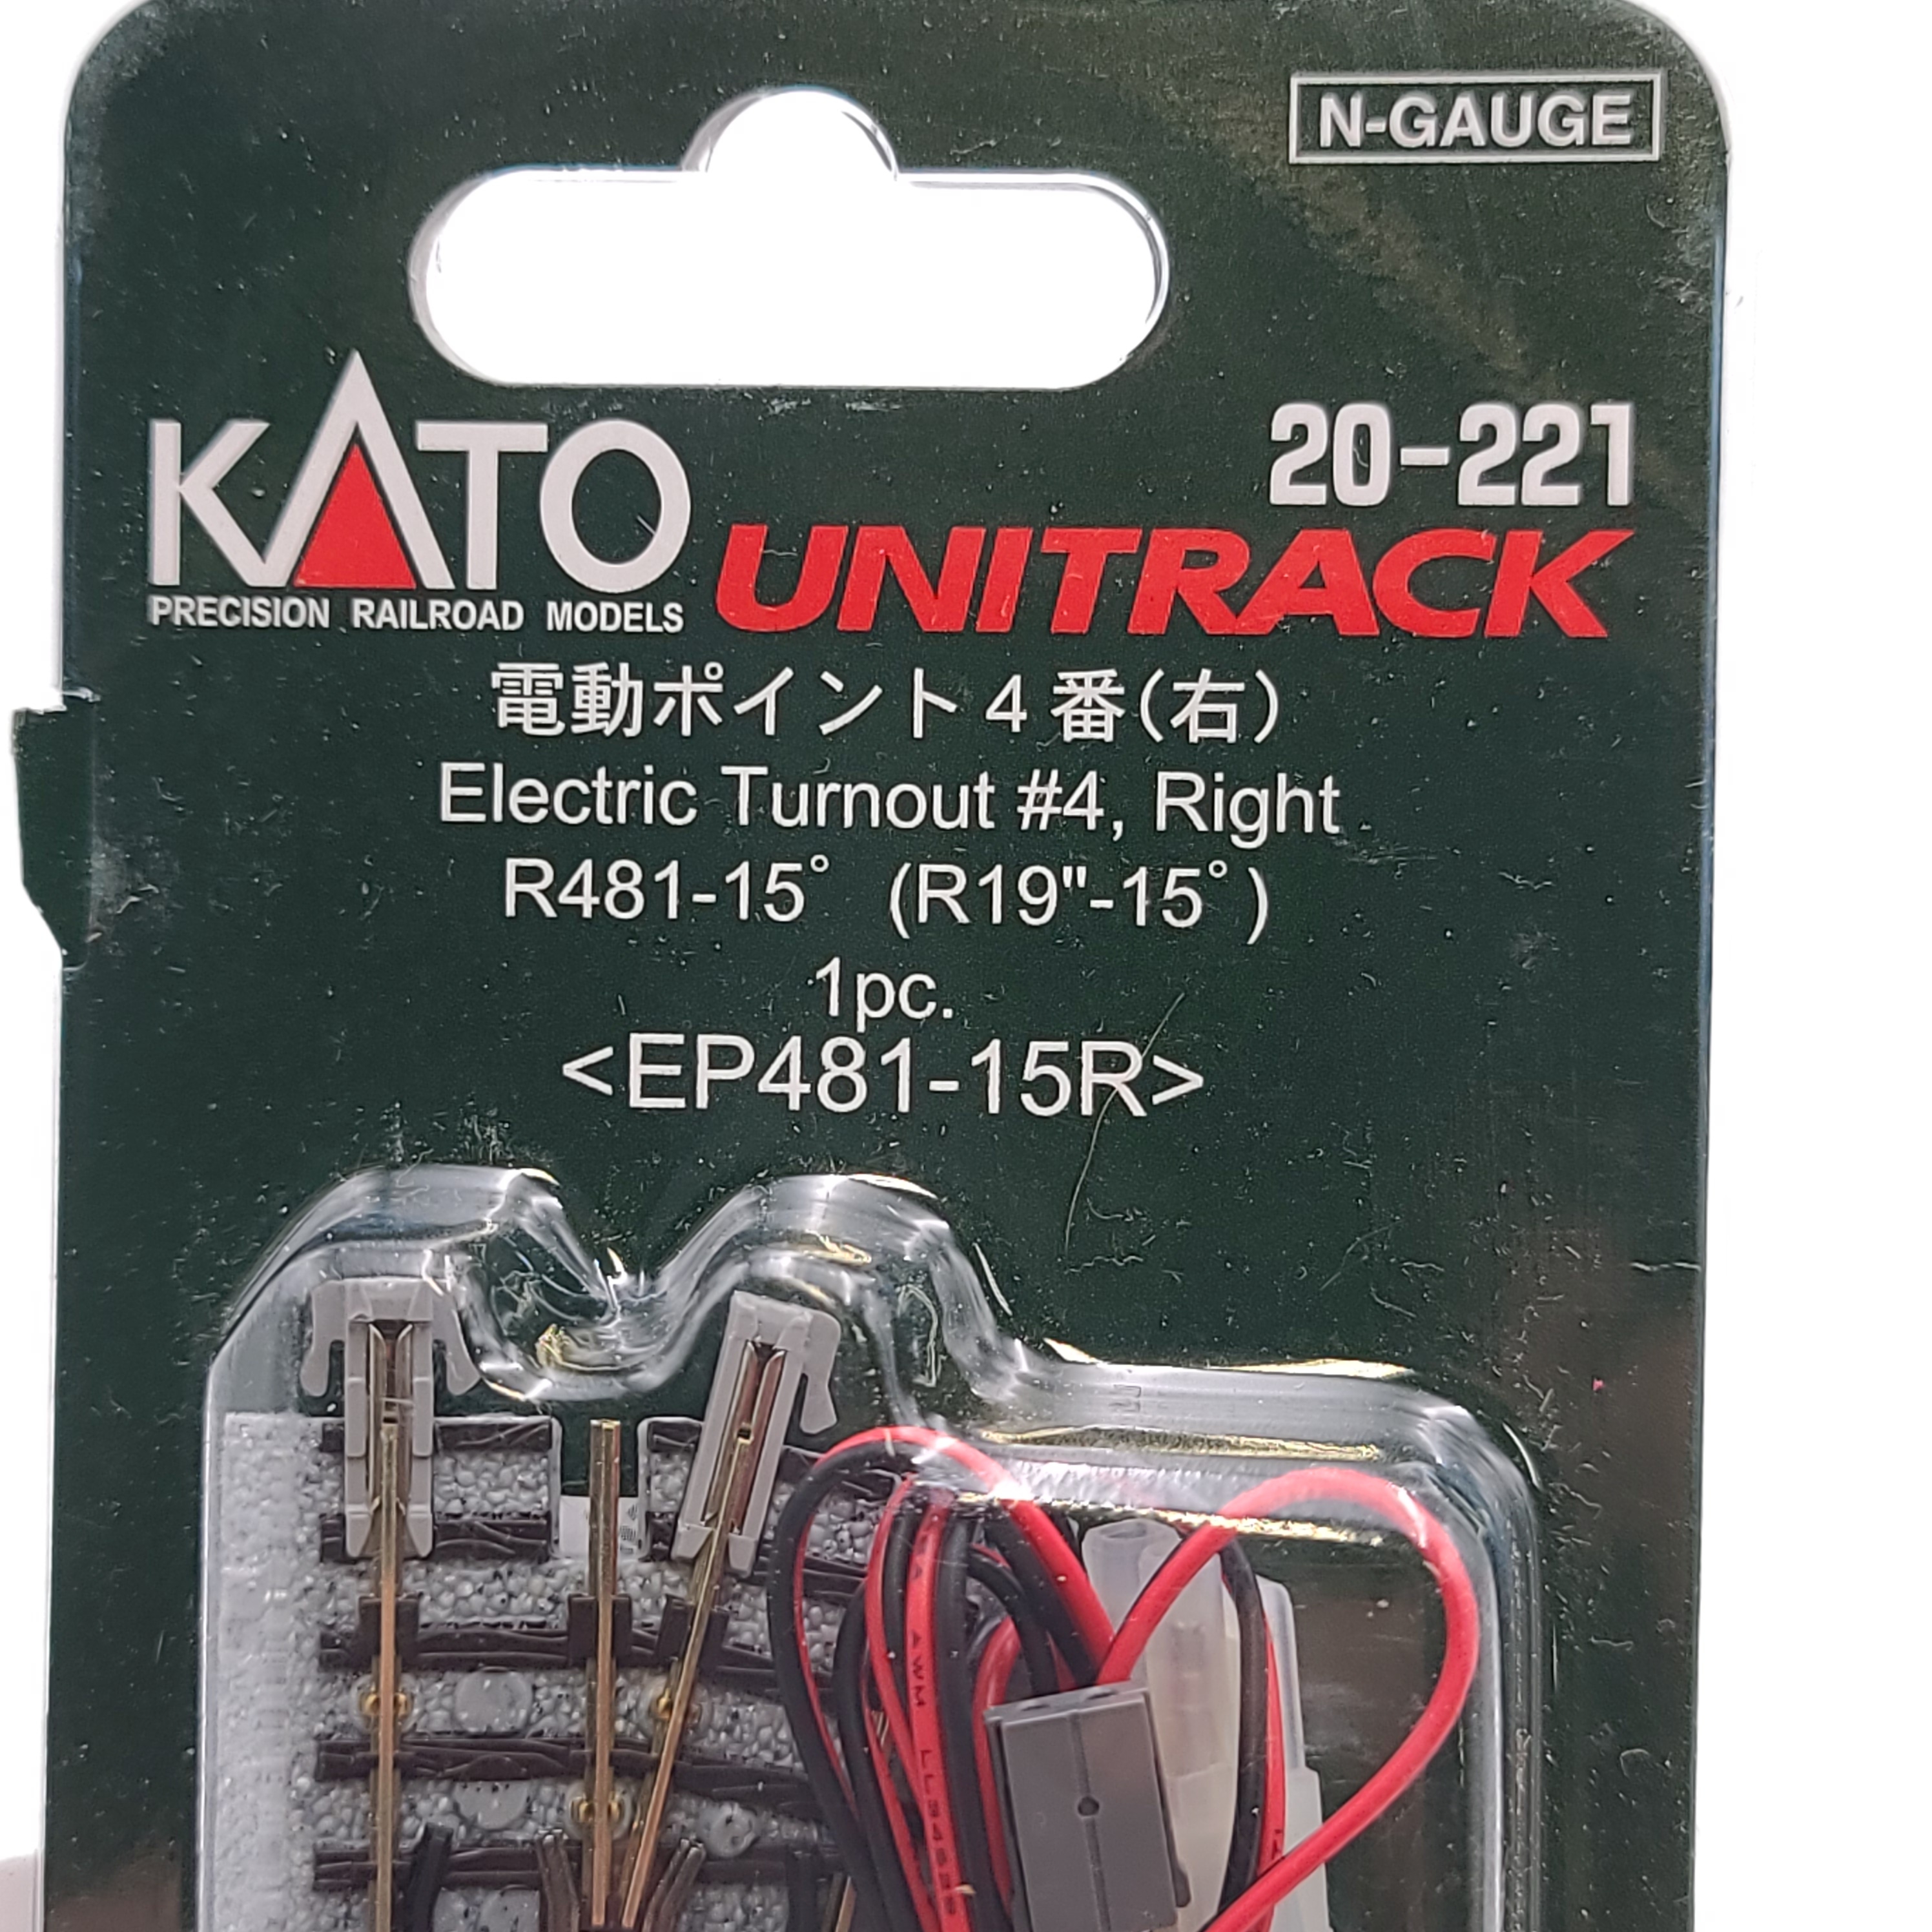 Kato n gauge Unitrack Electric Turnout Right #4 20-221 R481-15 